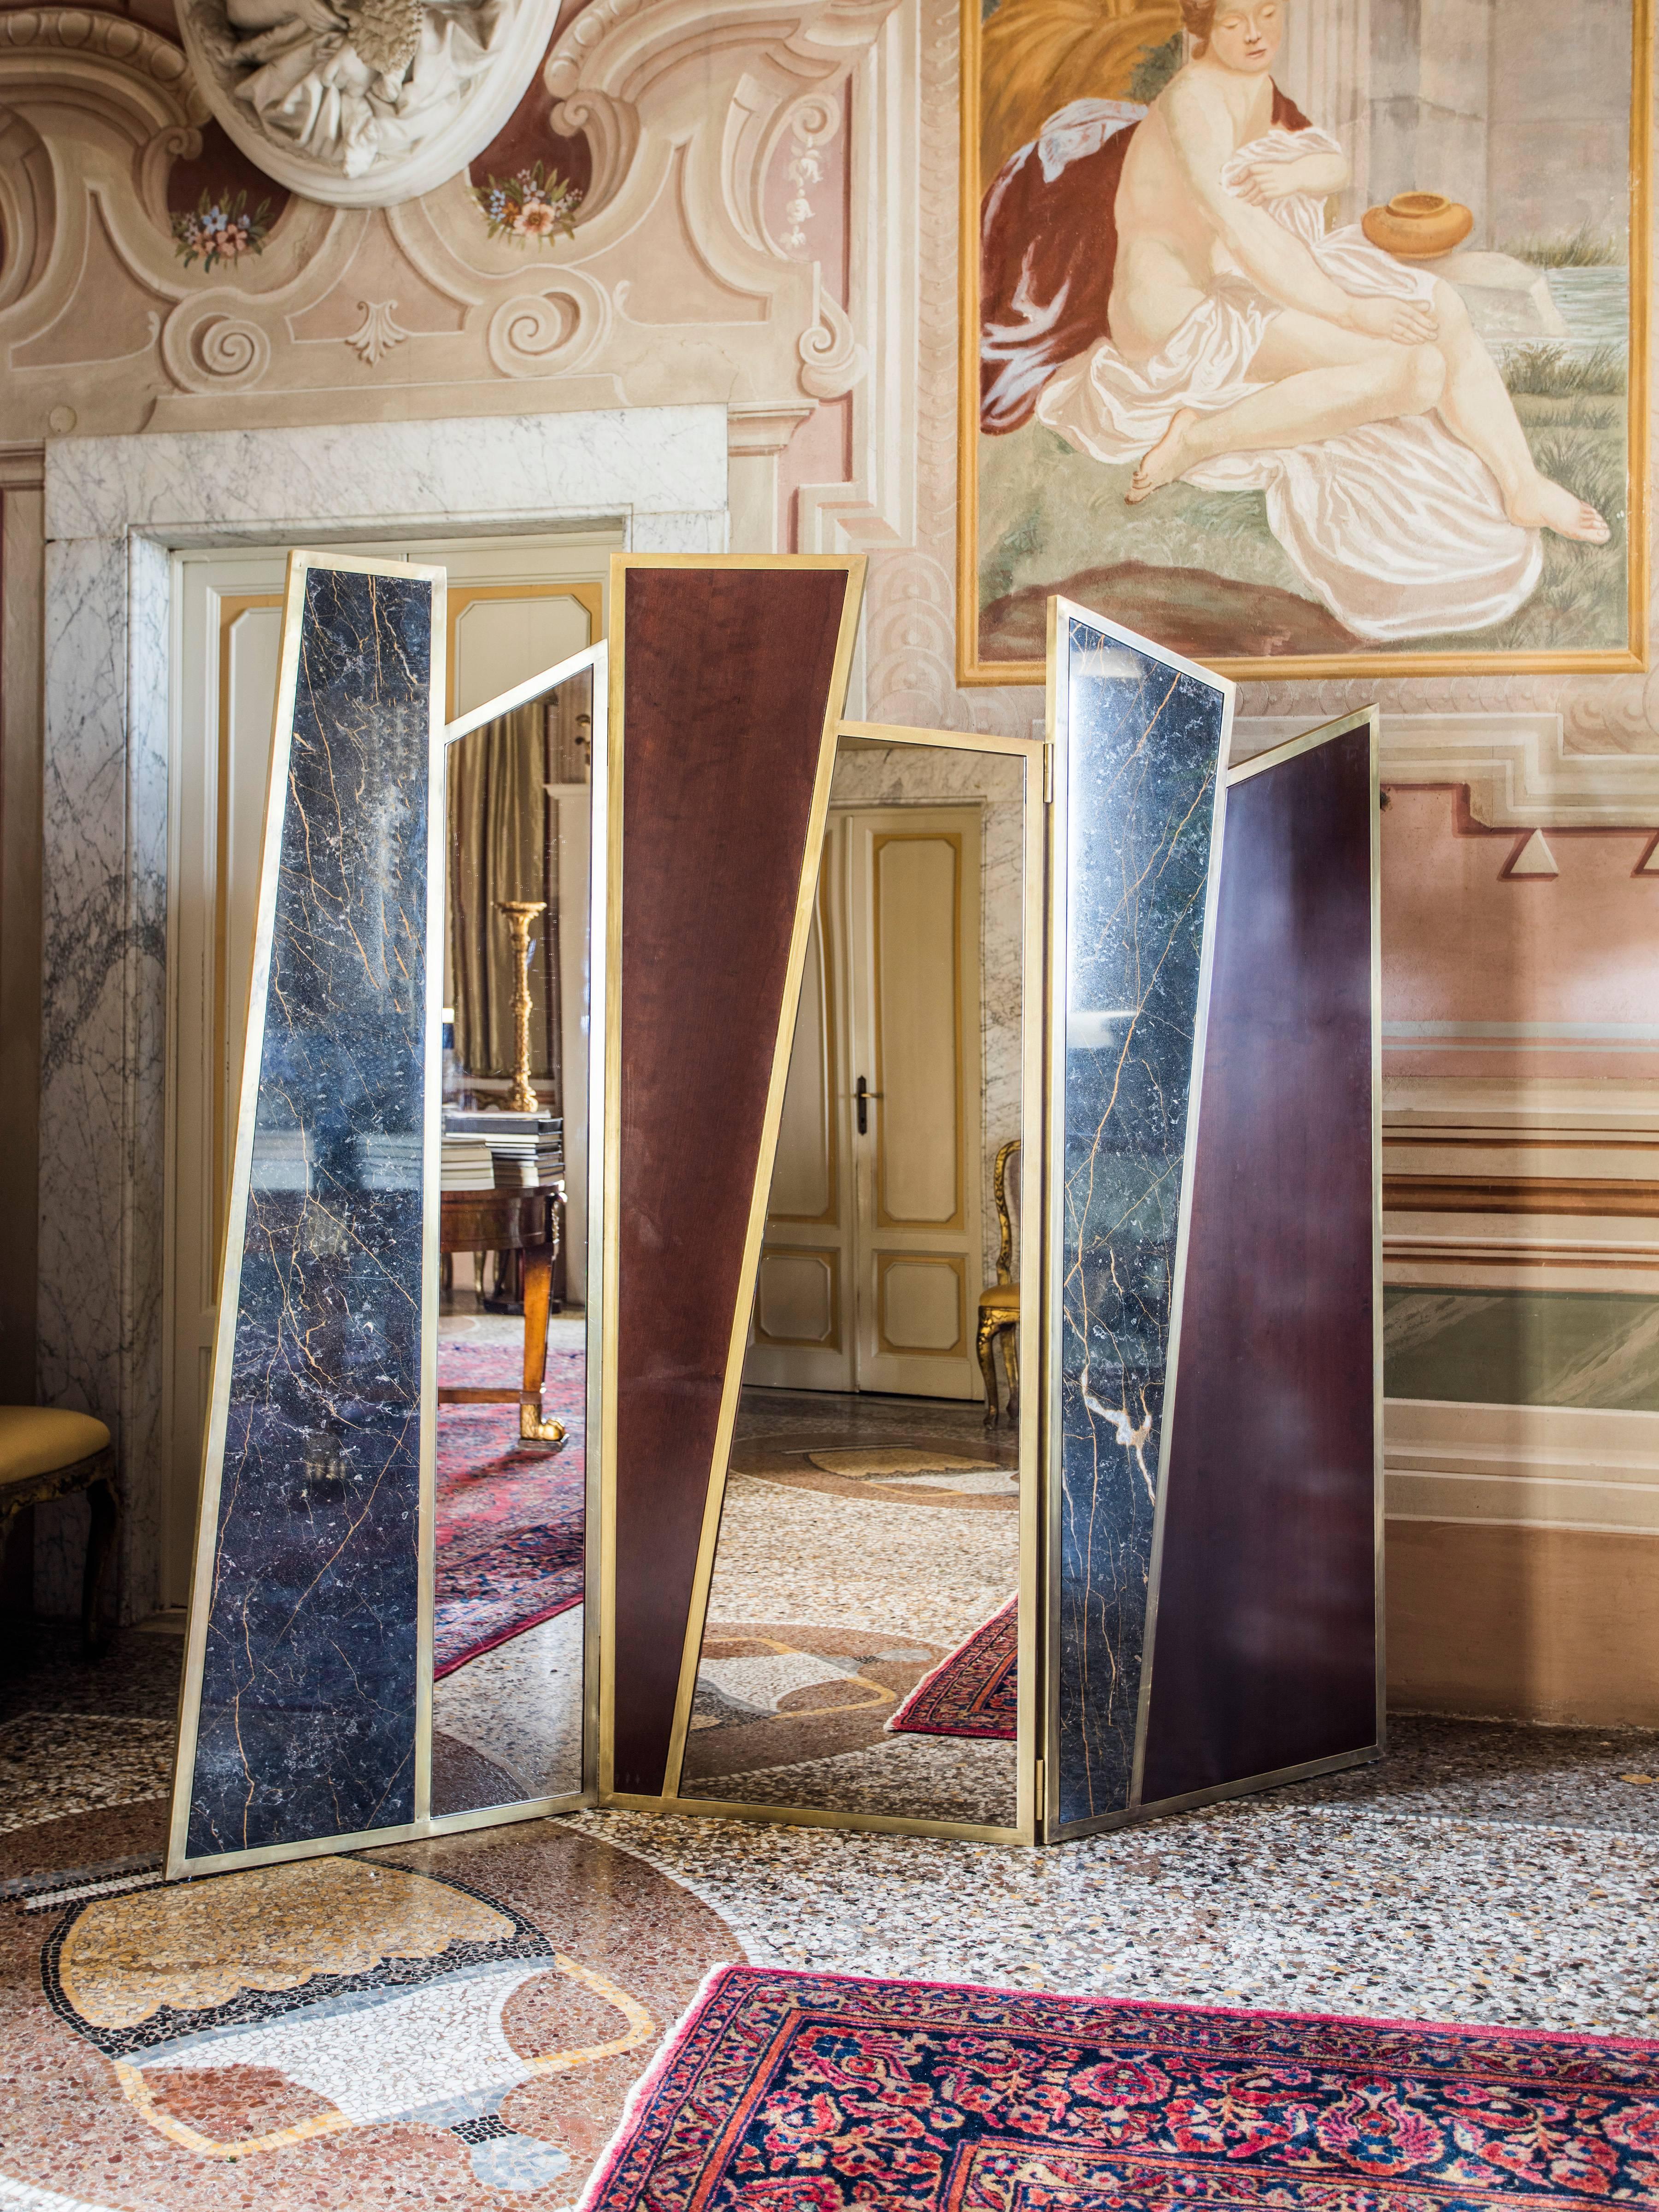 Eros is a screen in brass with panels in black Port Laurent marble, cherry wood and bronzed mirror glass.
Eros belongs to the Capsule collection 2017 by Massimiliano Giornetti, long time creative director for the fashion house Salvatore Ferragamo